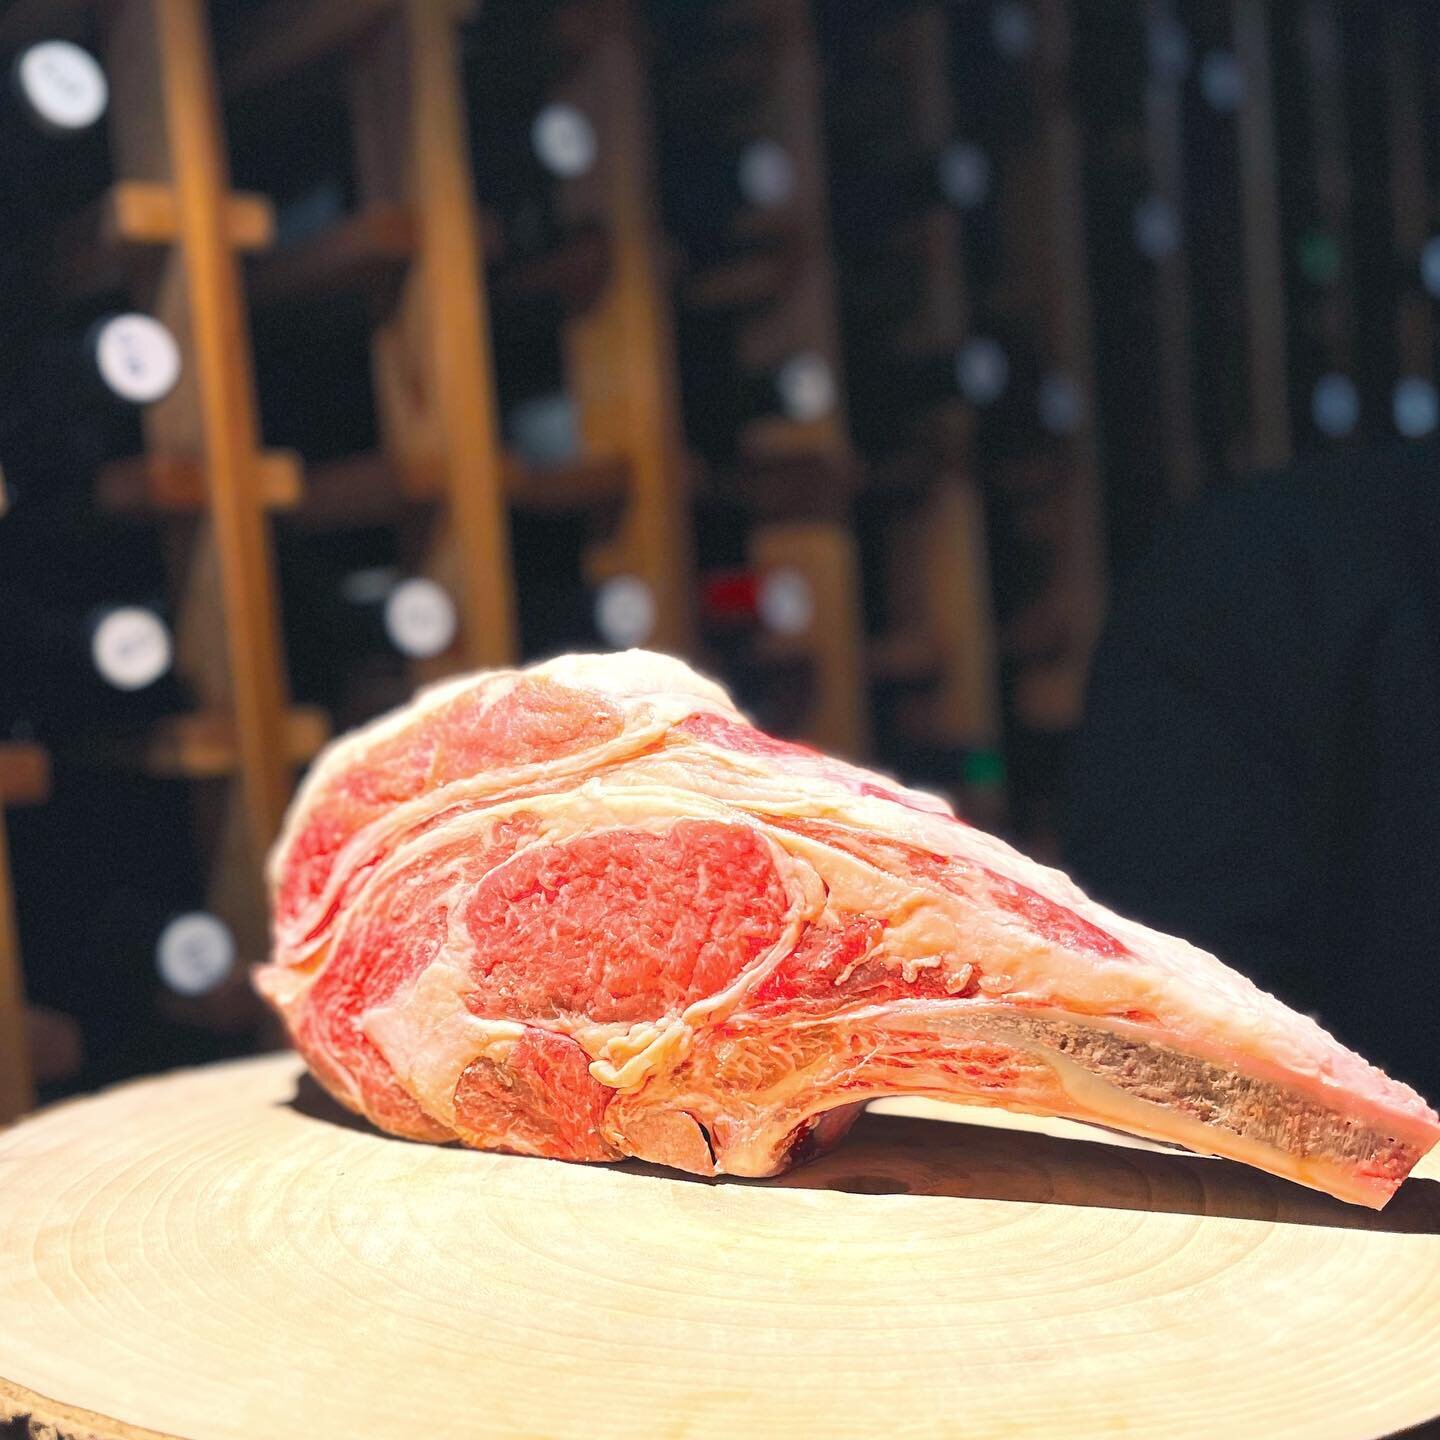 Tonight at Oklahoma&rsquo;s original prime steakhouse we&rsquo;re featuring an excellent 40 oz. long bone Ribeye cut of American wagyu from @domenicafarms 👌🏼 Join us this evening at Boulevard Steakhouse!